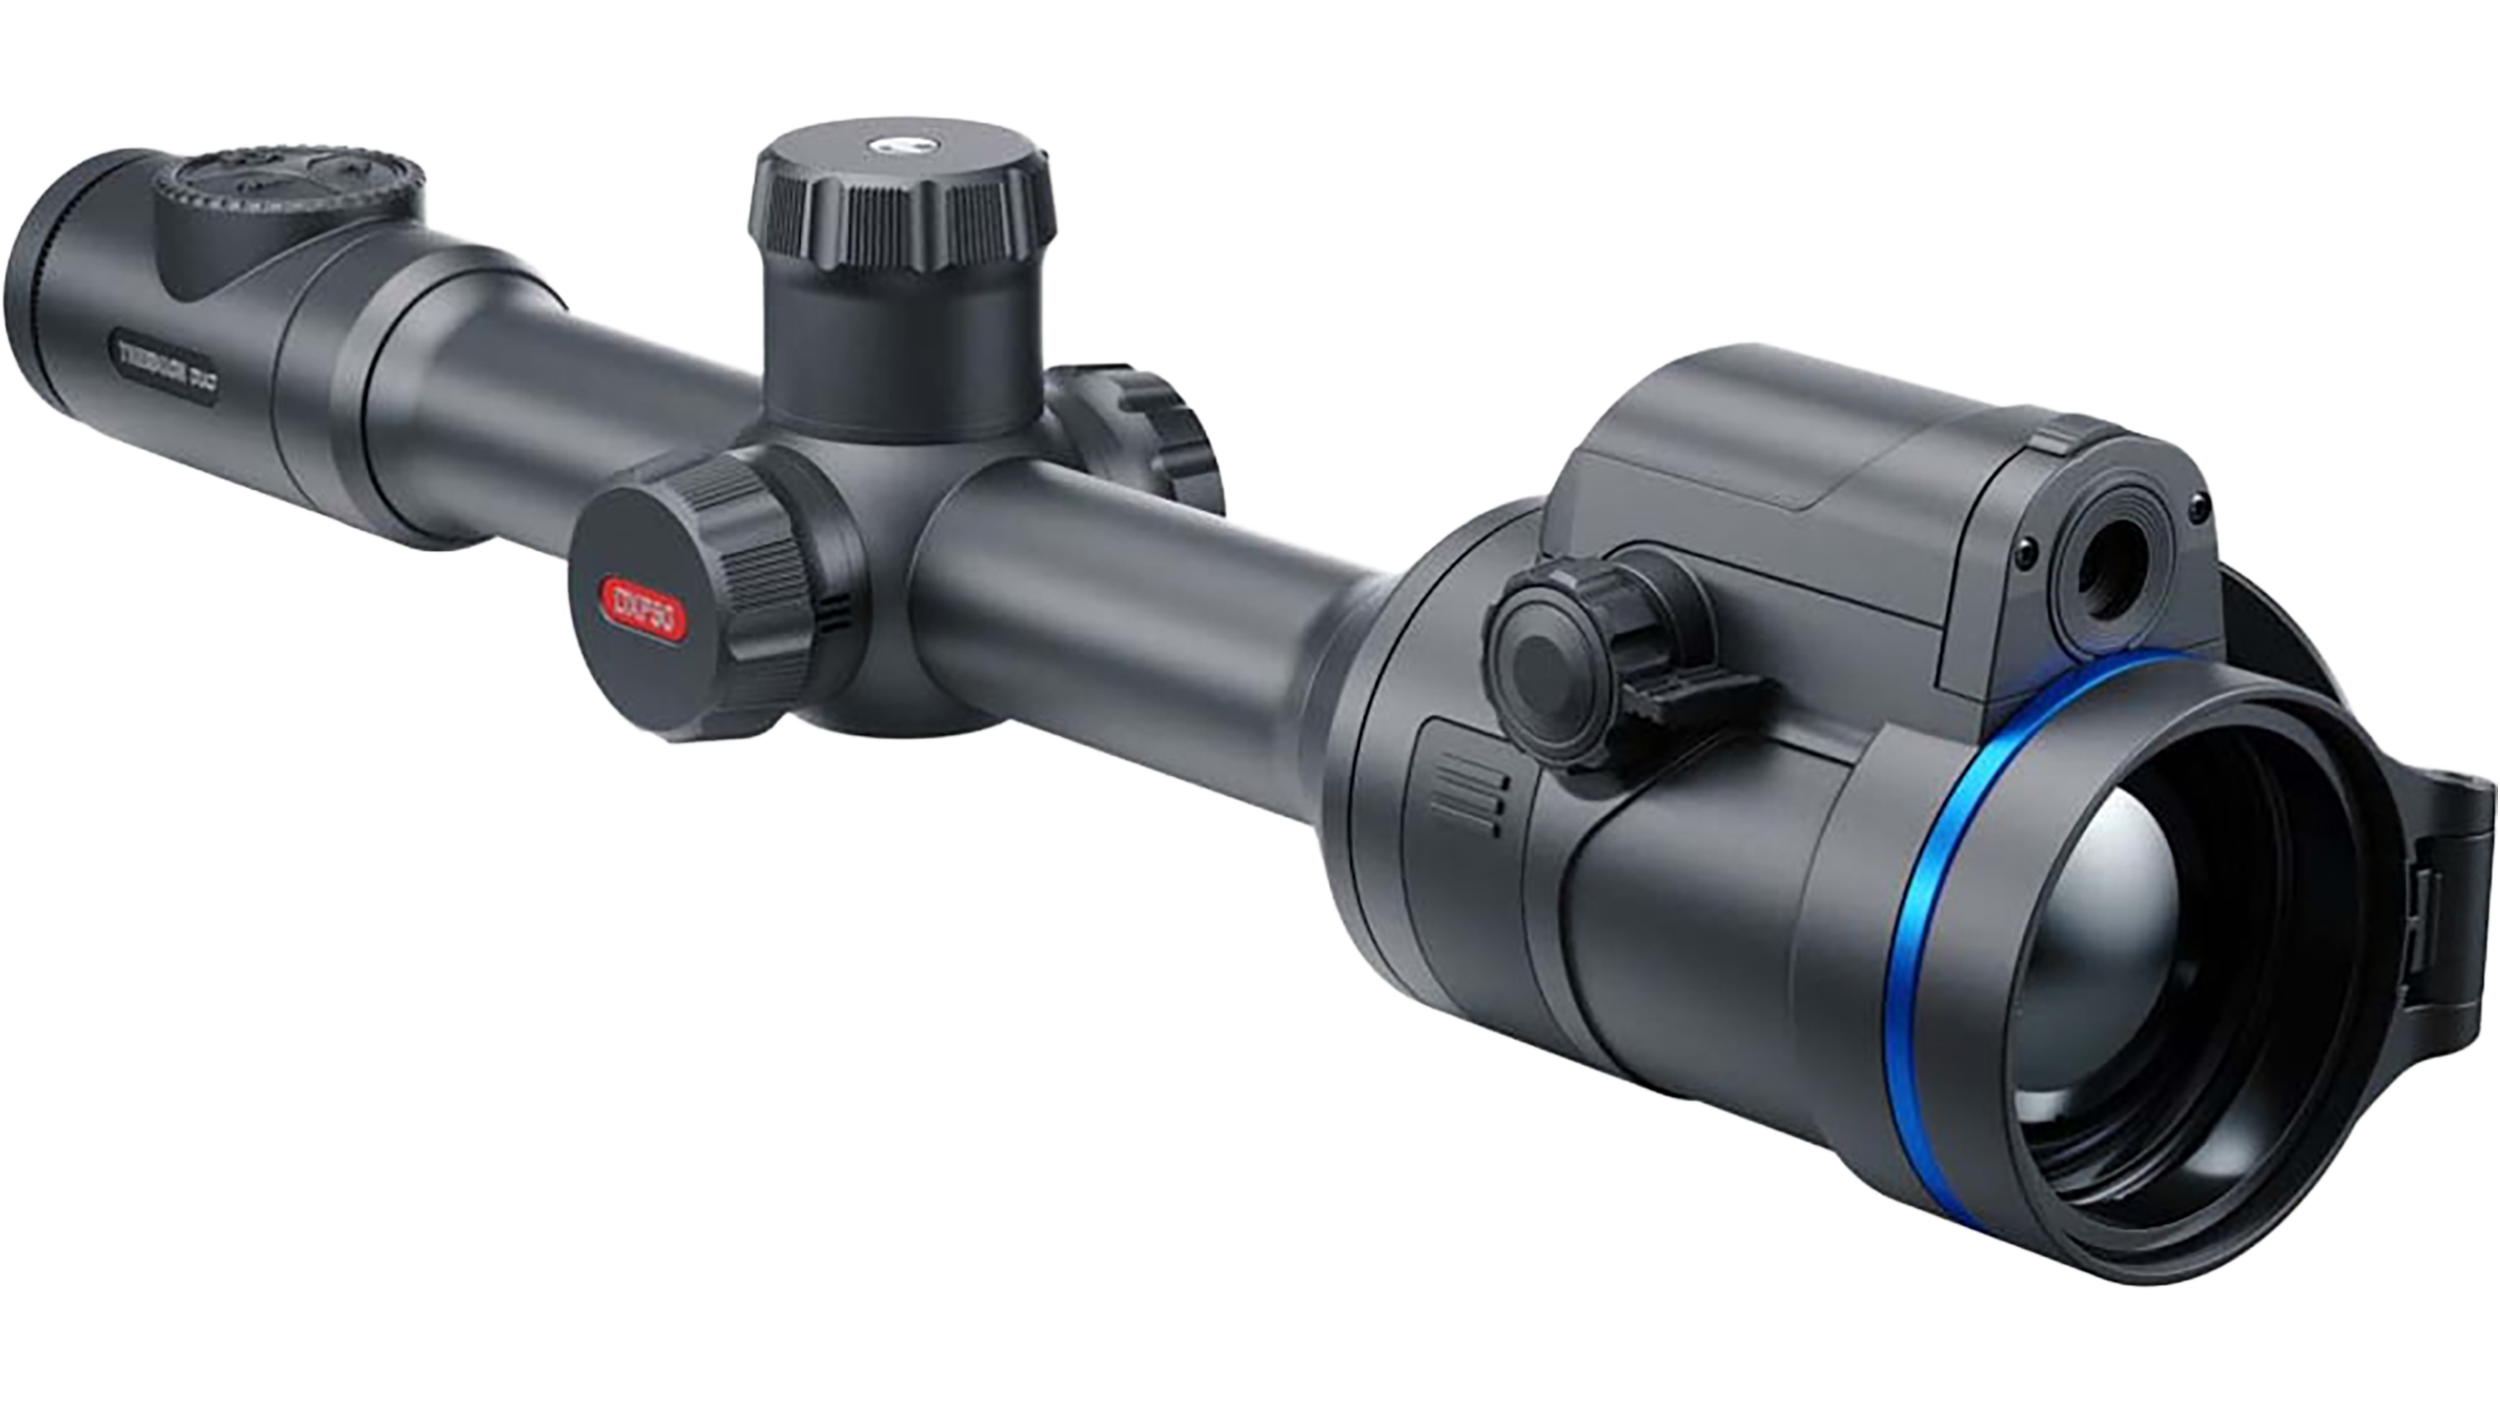 Pulsar Thermion Duo DXP55 Thermal Rifle Scope Black 4x 55mm - On Sale!